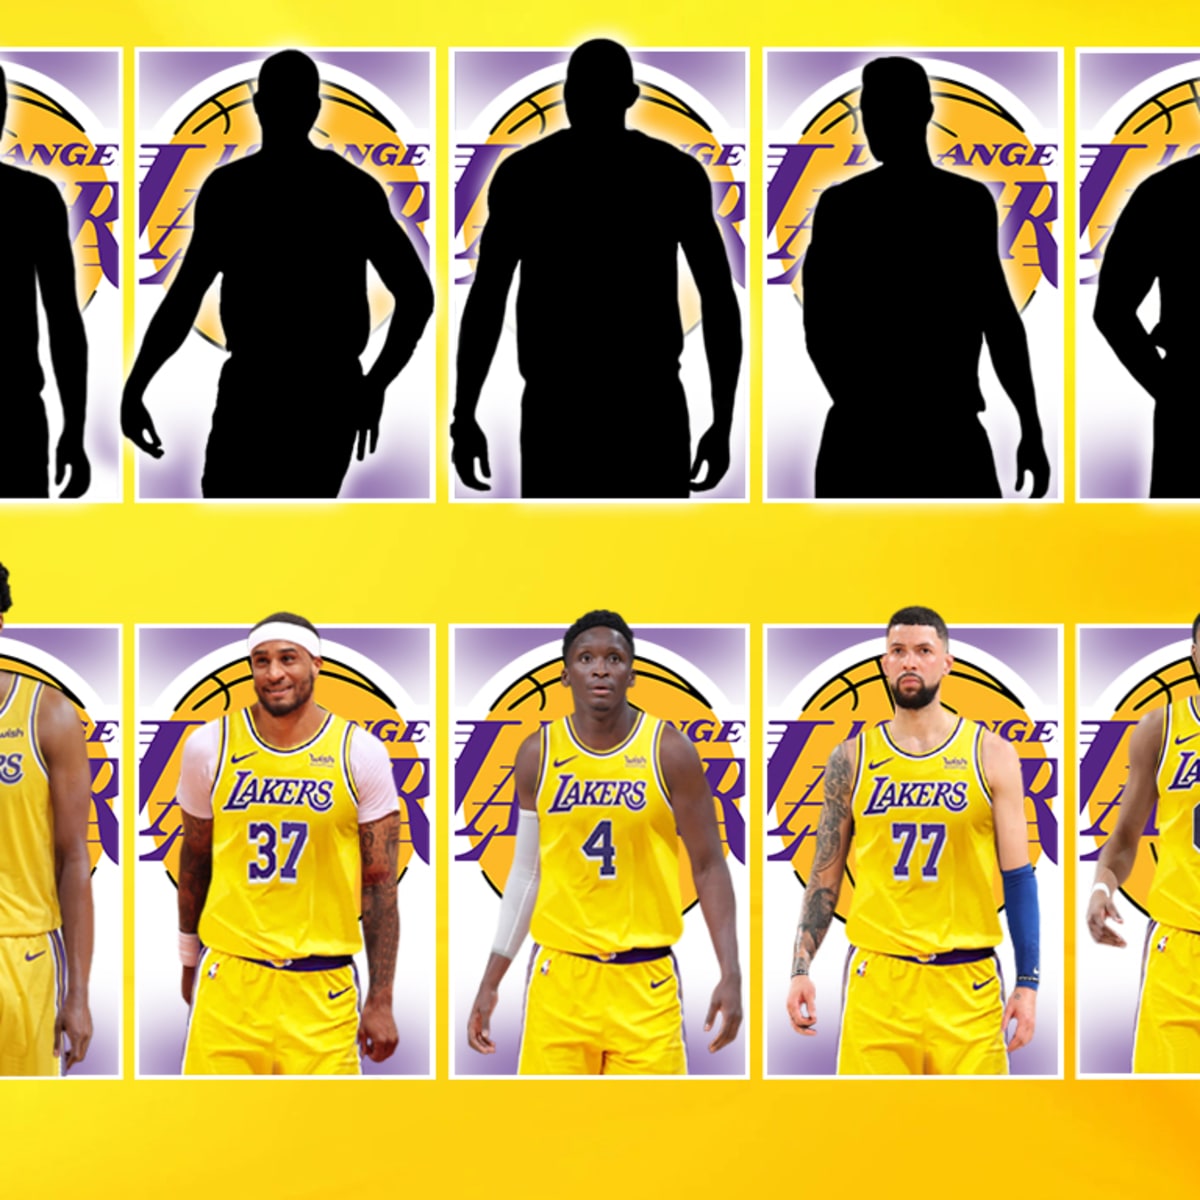 2022 NBA All-Star uniforms leak, millions cry out in terror